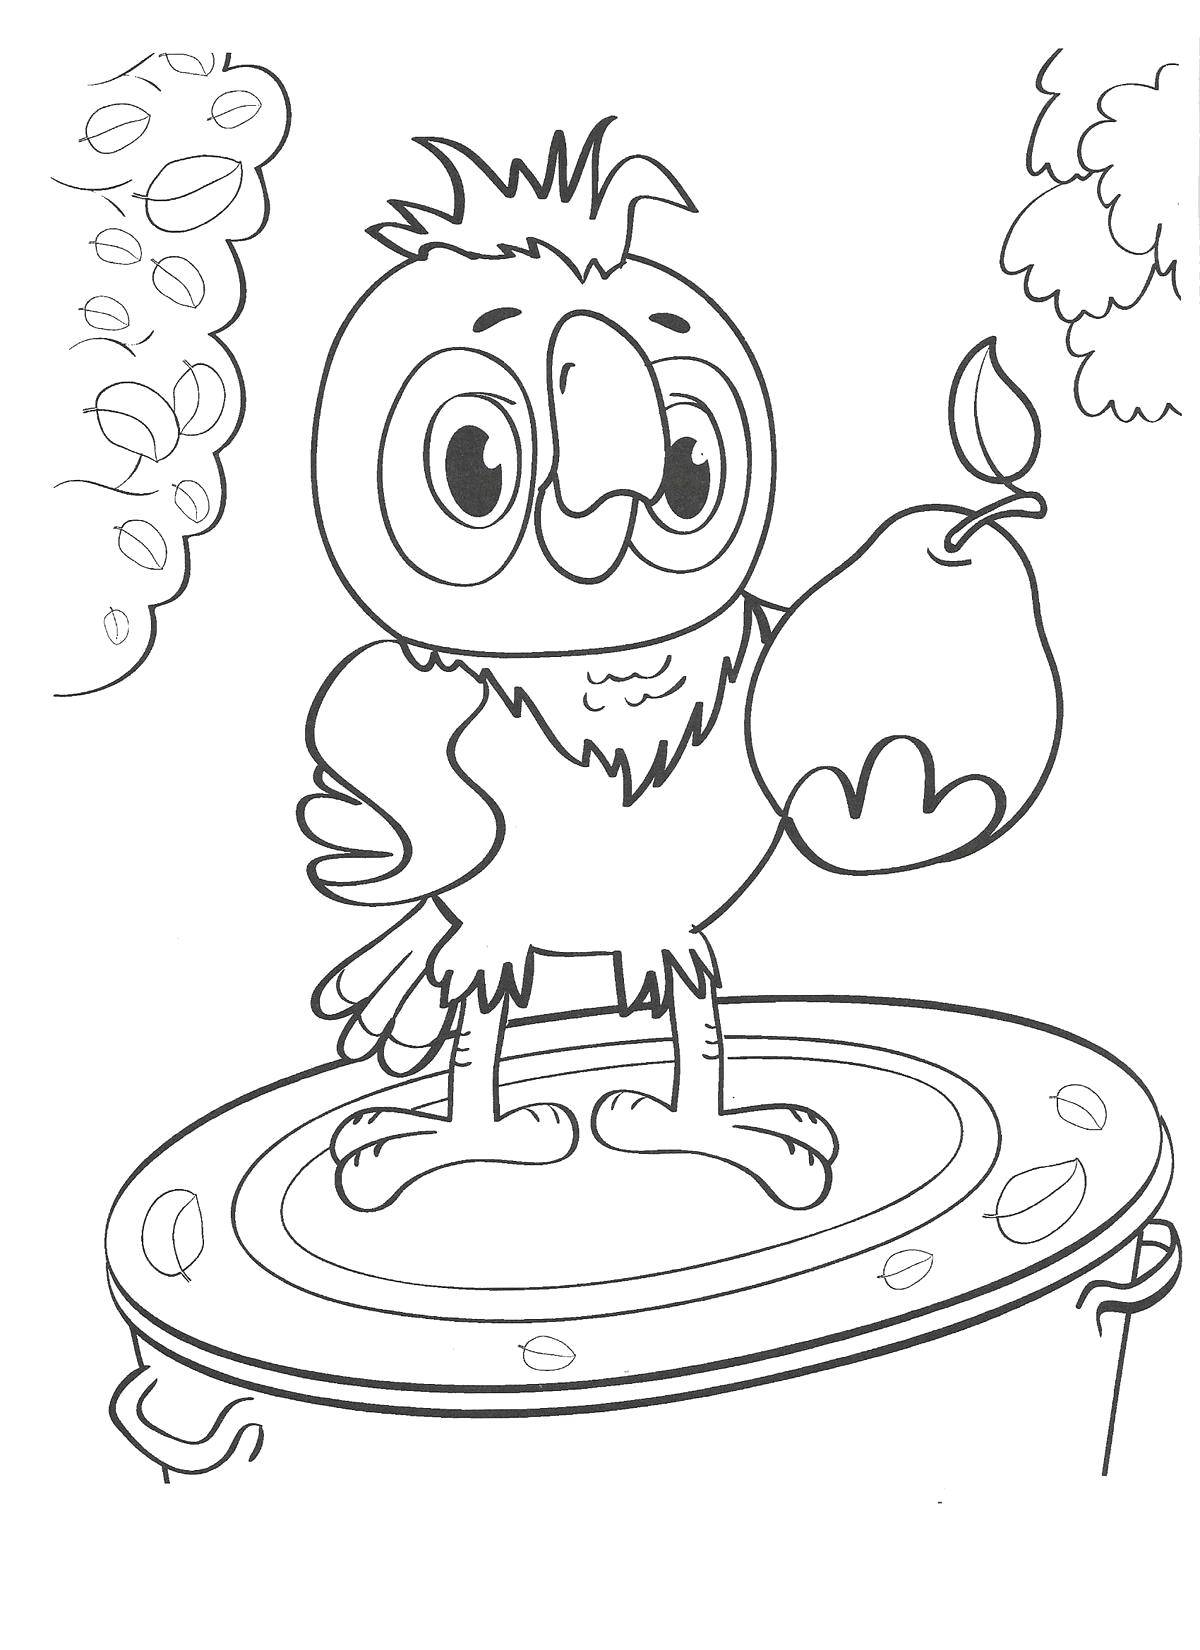 Coloring Parrot Kesha. Category coloring pages parrot Kesha. Tags:  Cartoon character Parrot Kesha.